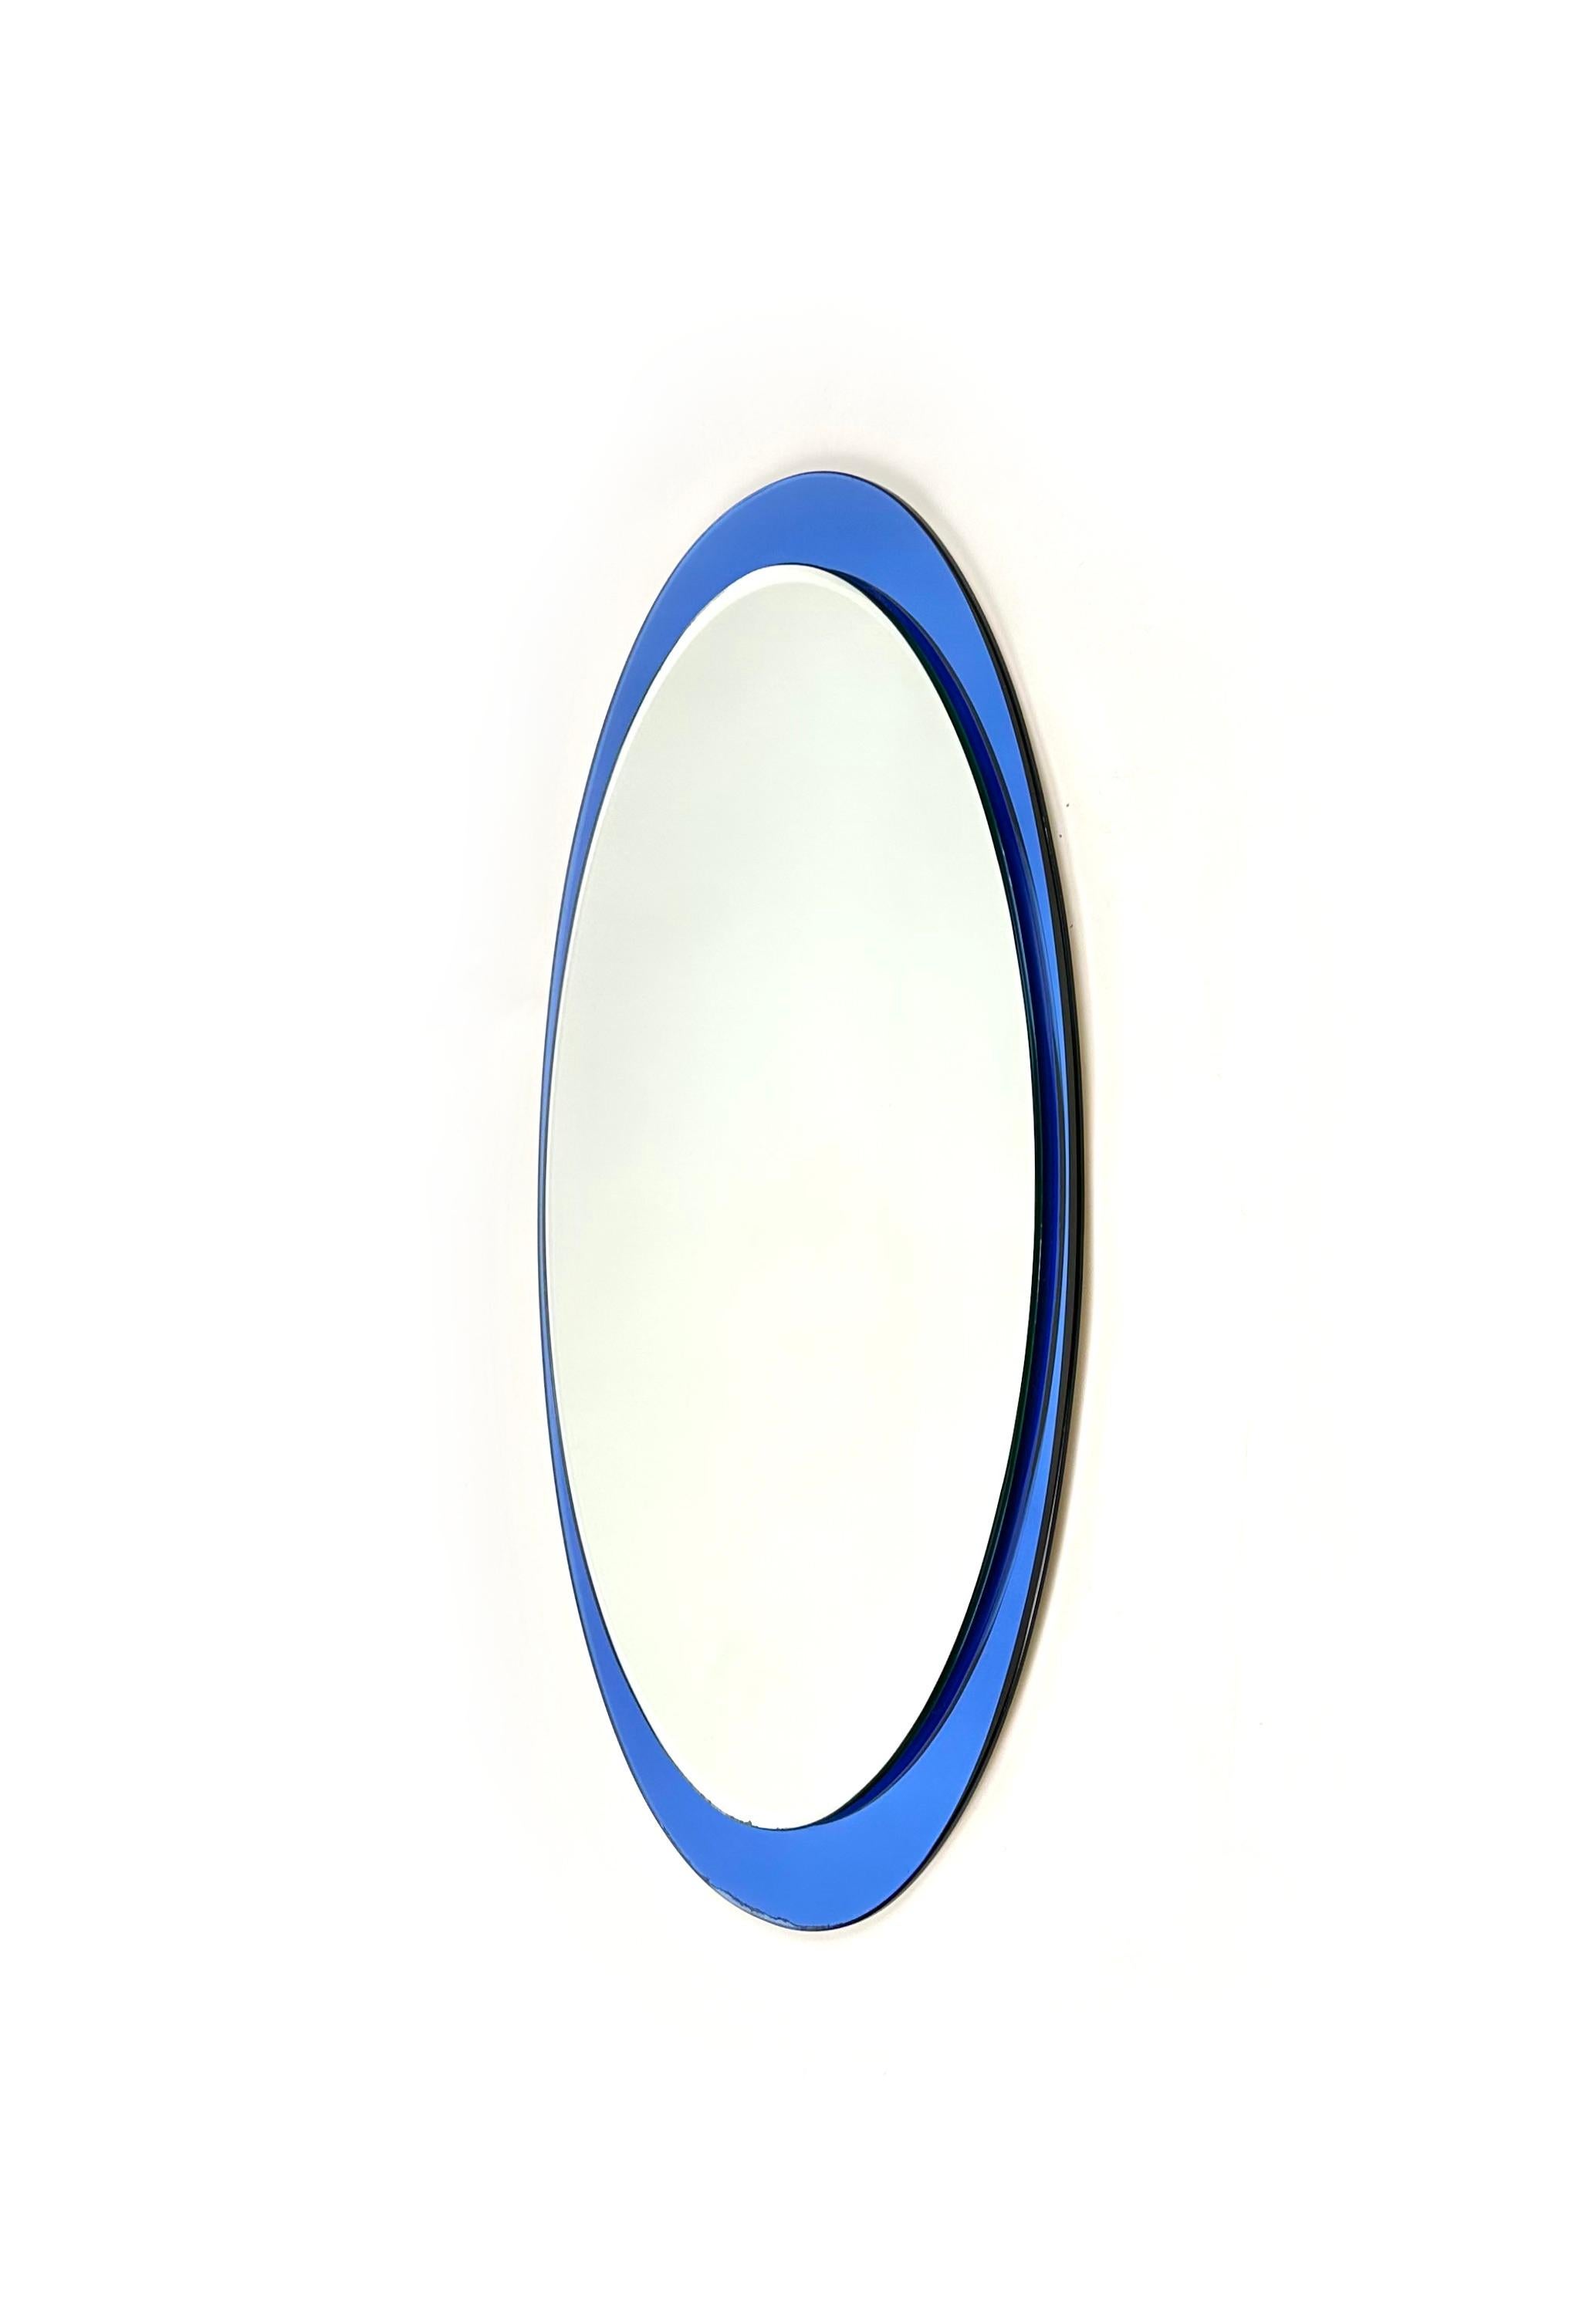 Italian Midcentury Oval Blue Wall Mirror by Metalvetro Galvorame, Italy, 1970s For Sale